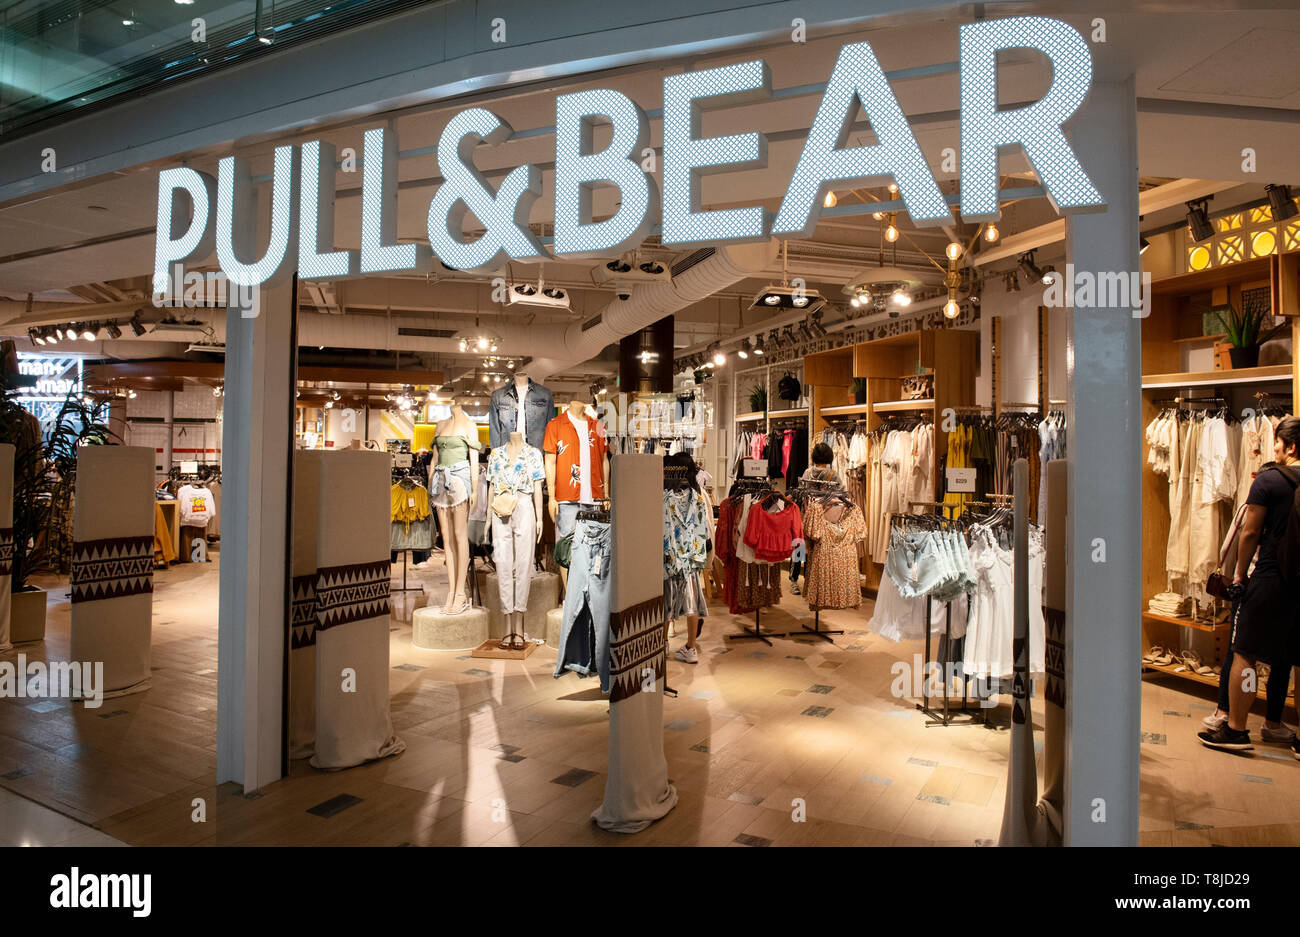 Spanish multinational clothing design retail company by Inditex, Pull & Bear,  store and logo seen at a shopping mall in Hong Kong Stock Photo - Alamy